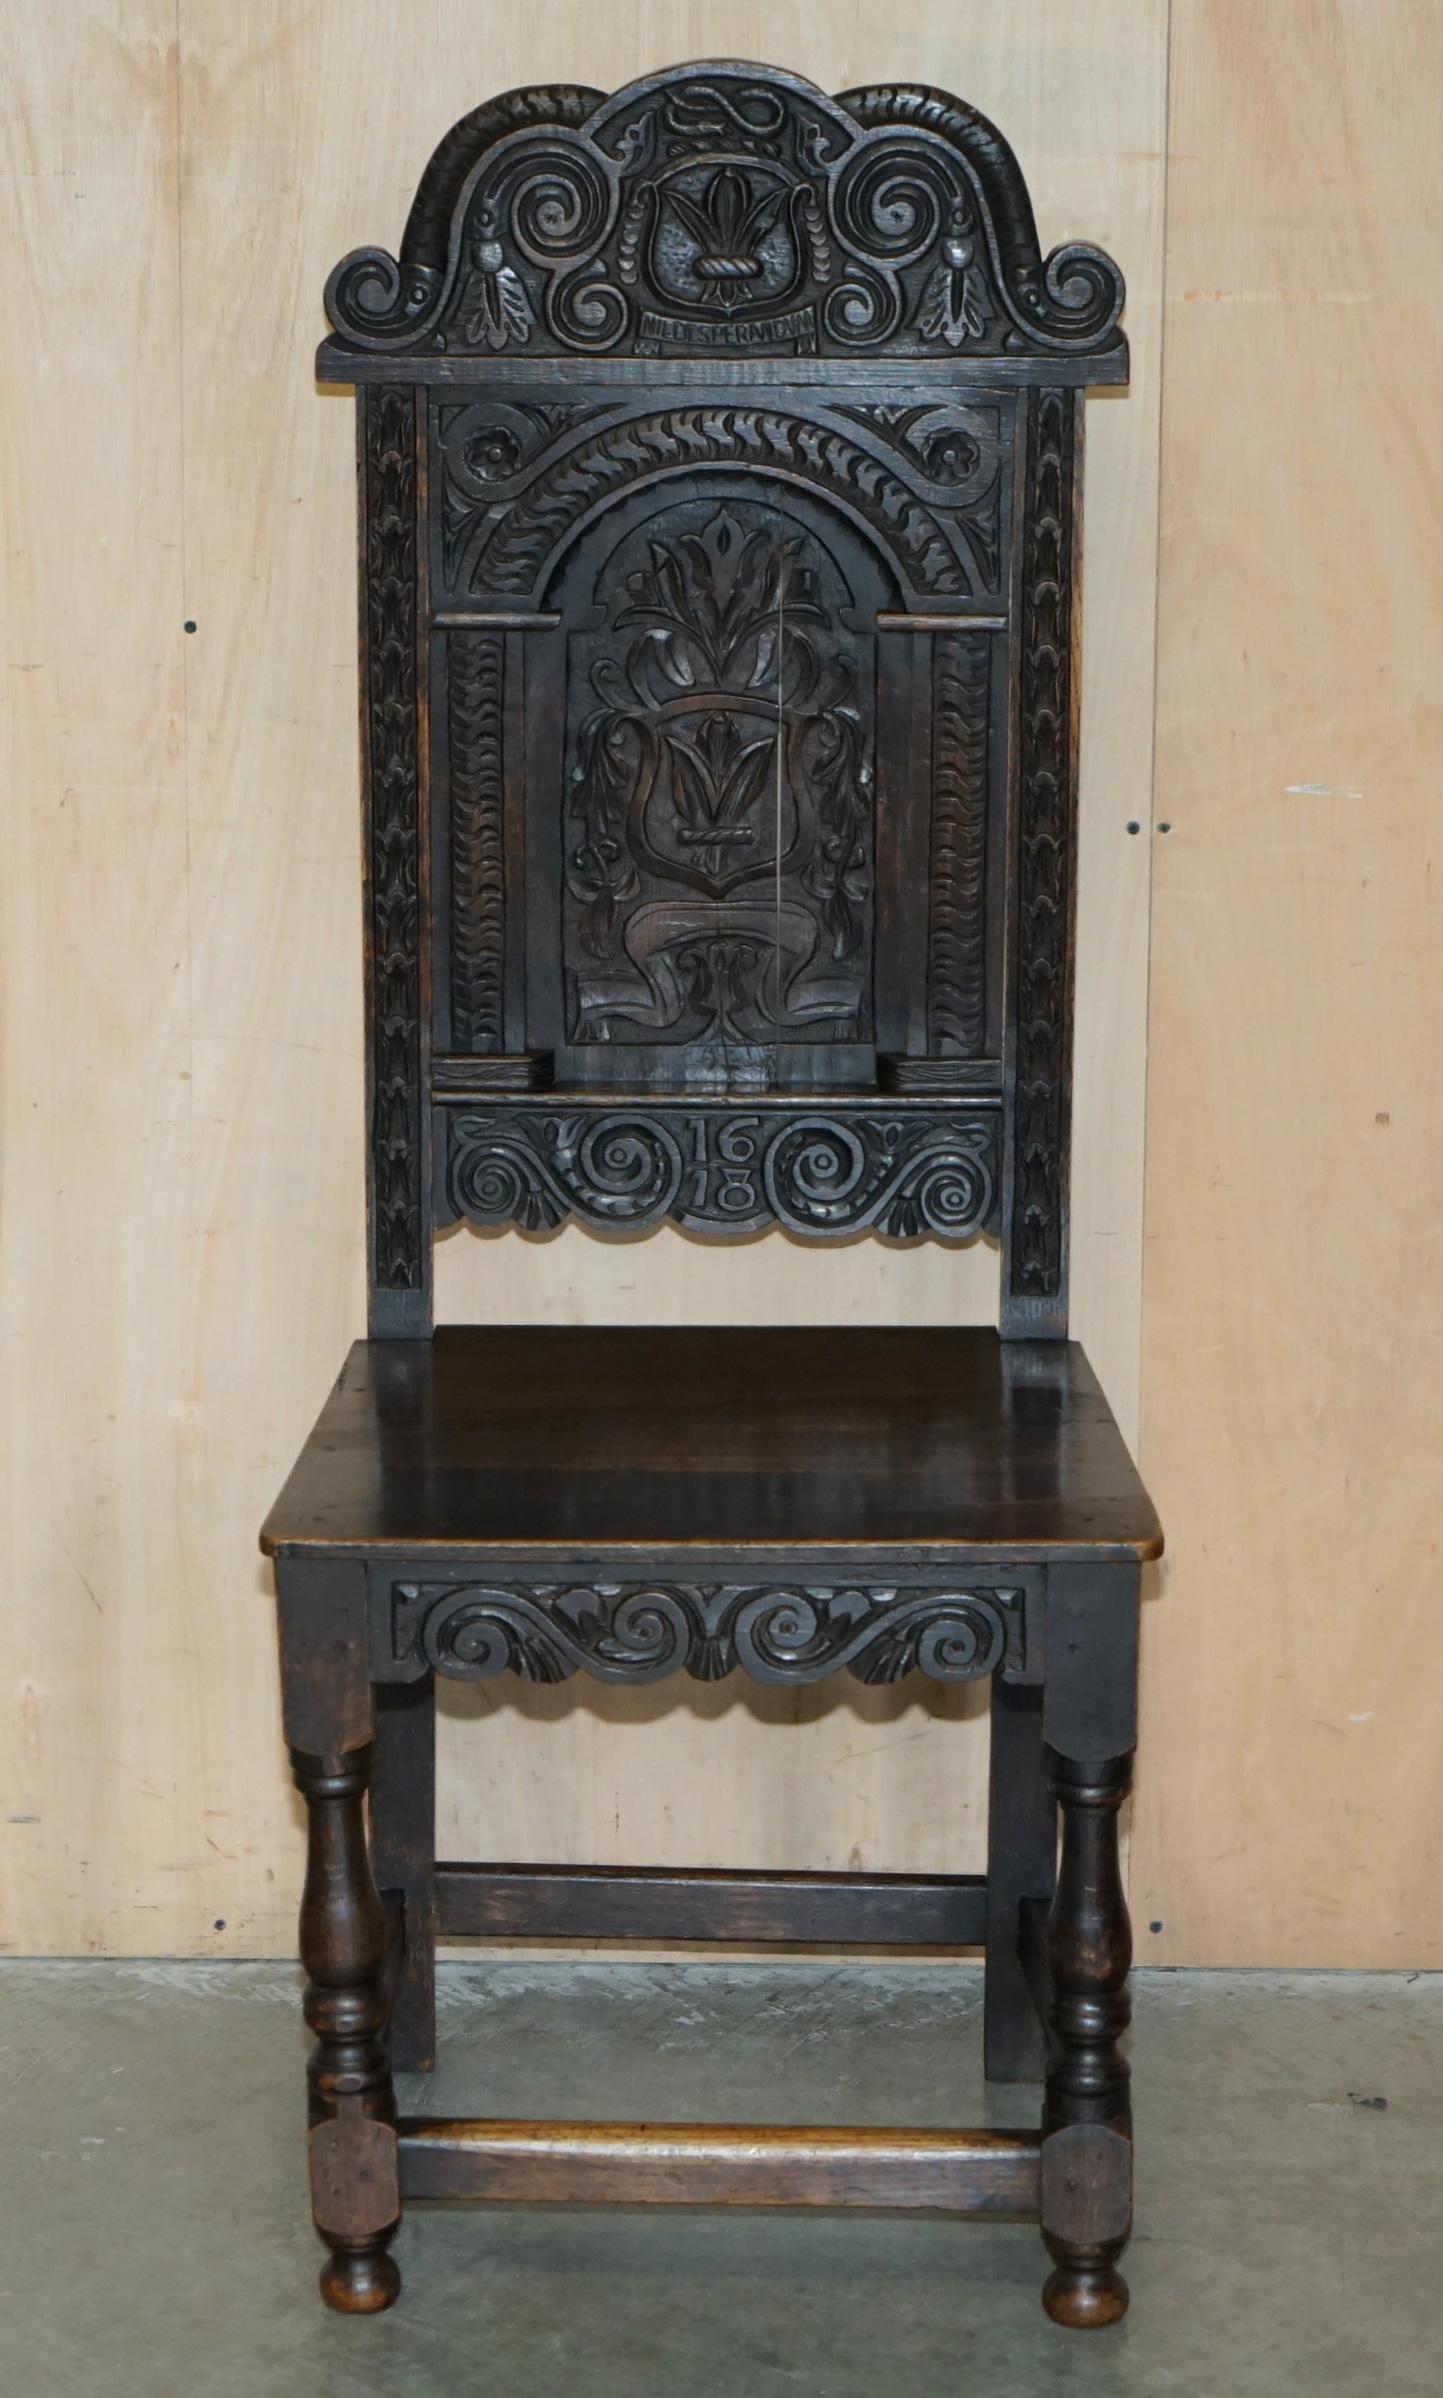 ANTIQUE PAIR OF 17TH CENTURY JACOBEAN ENGLISH OAK CHAIRS FROM THE FILM HELLBOy (Jakobinisch) im Angebot